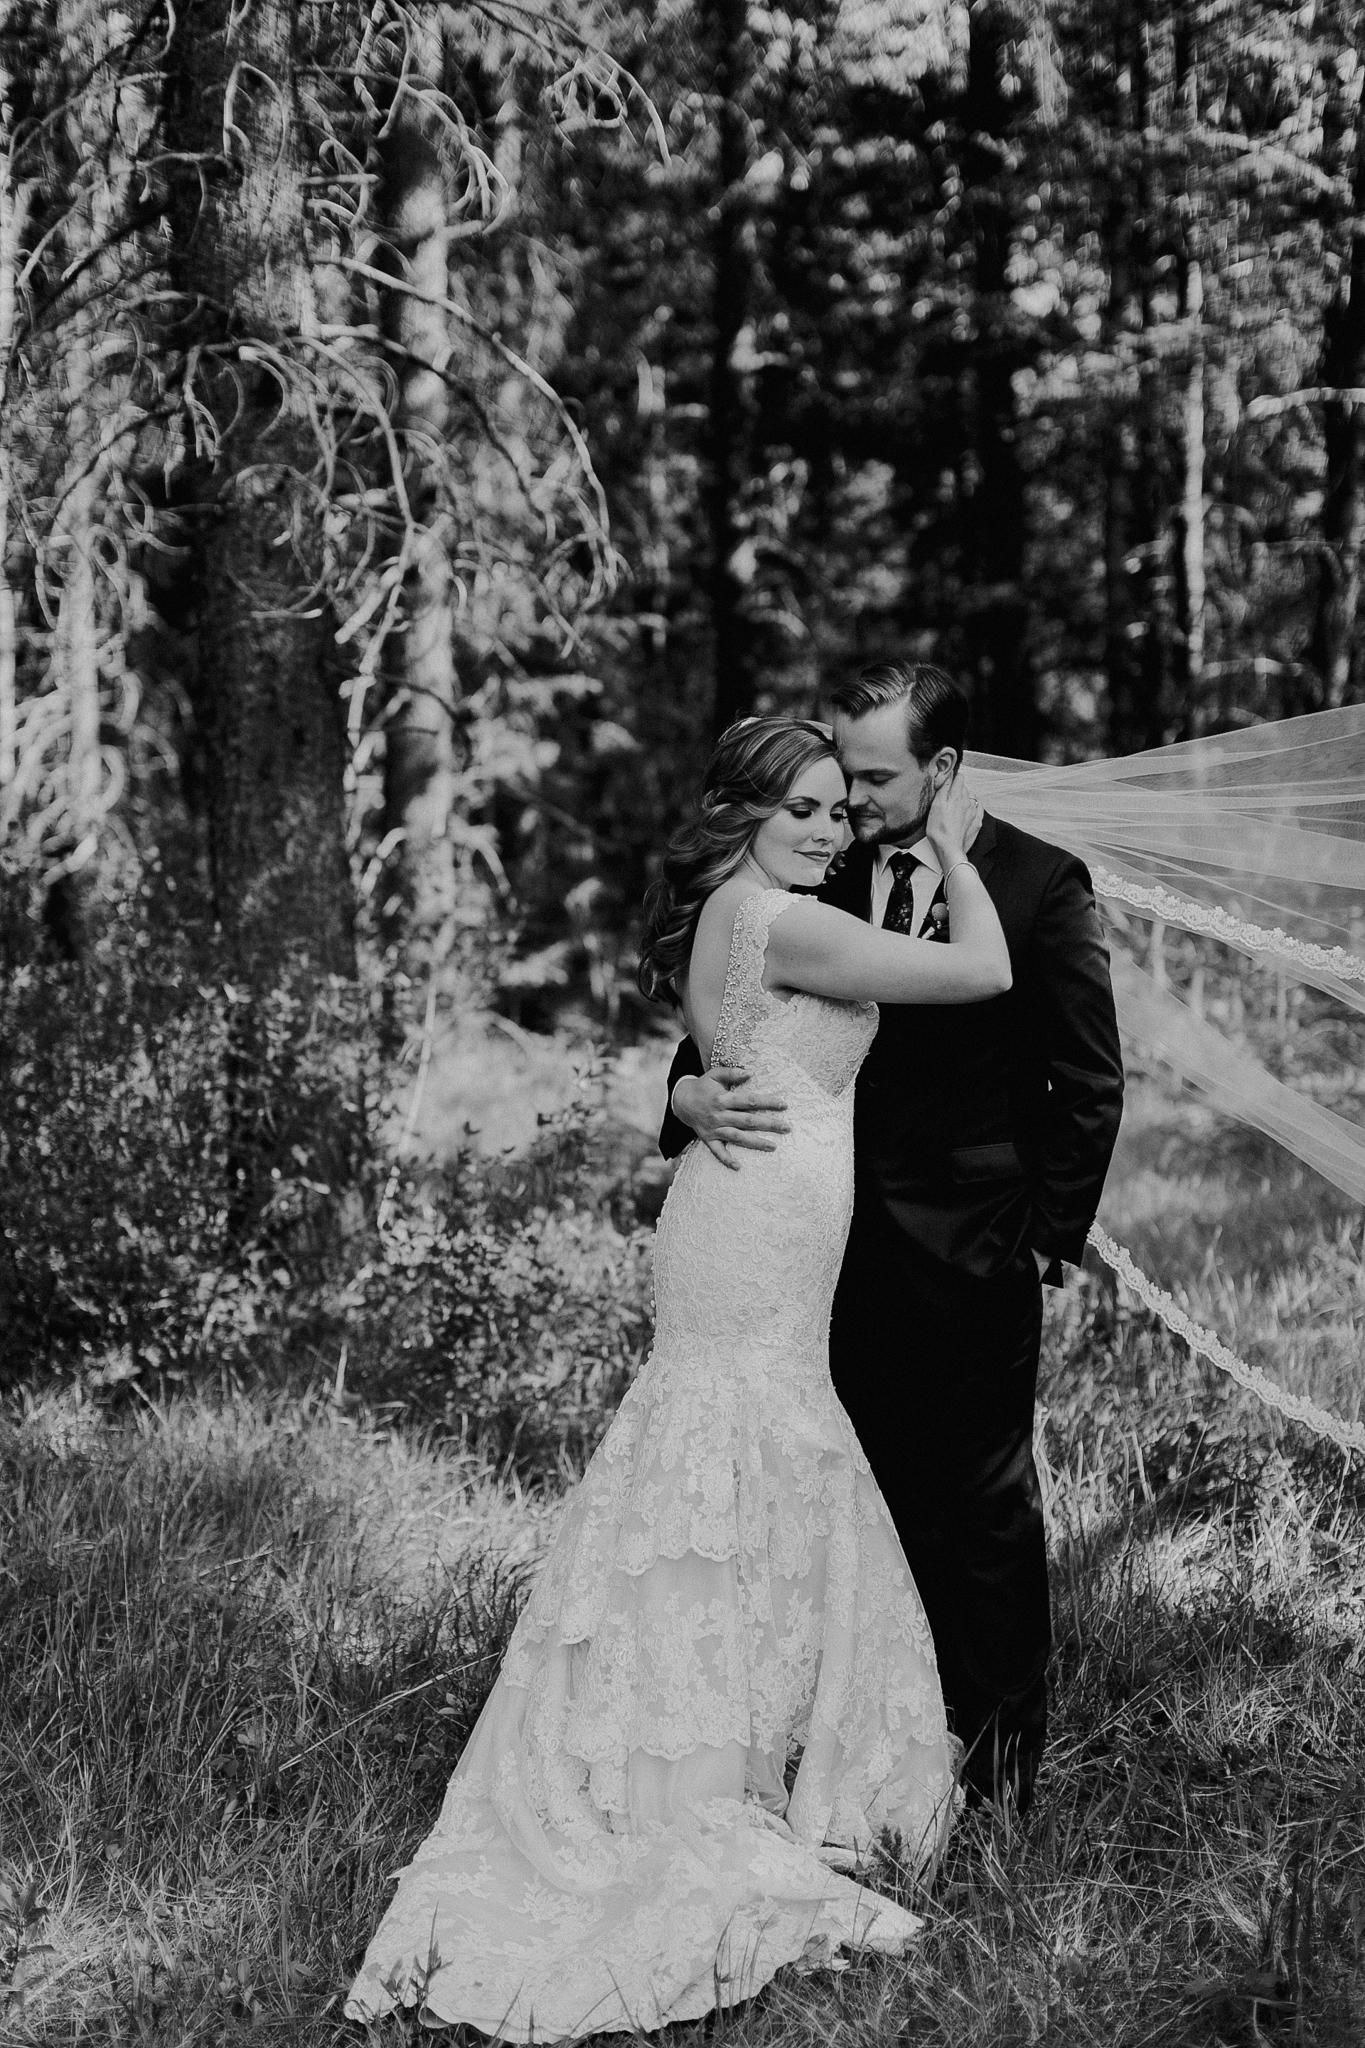 Bride poses for photo in black and white portrait at Silvertip Resort Canmore destination wedding